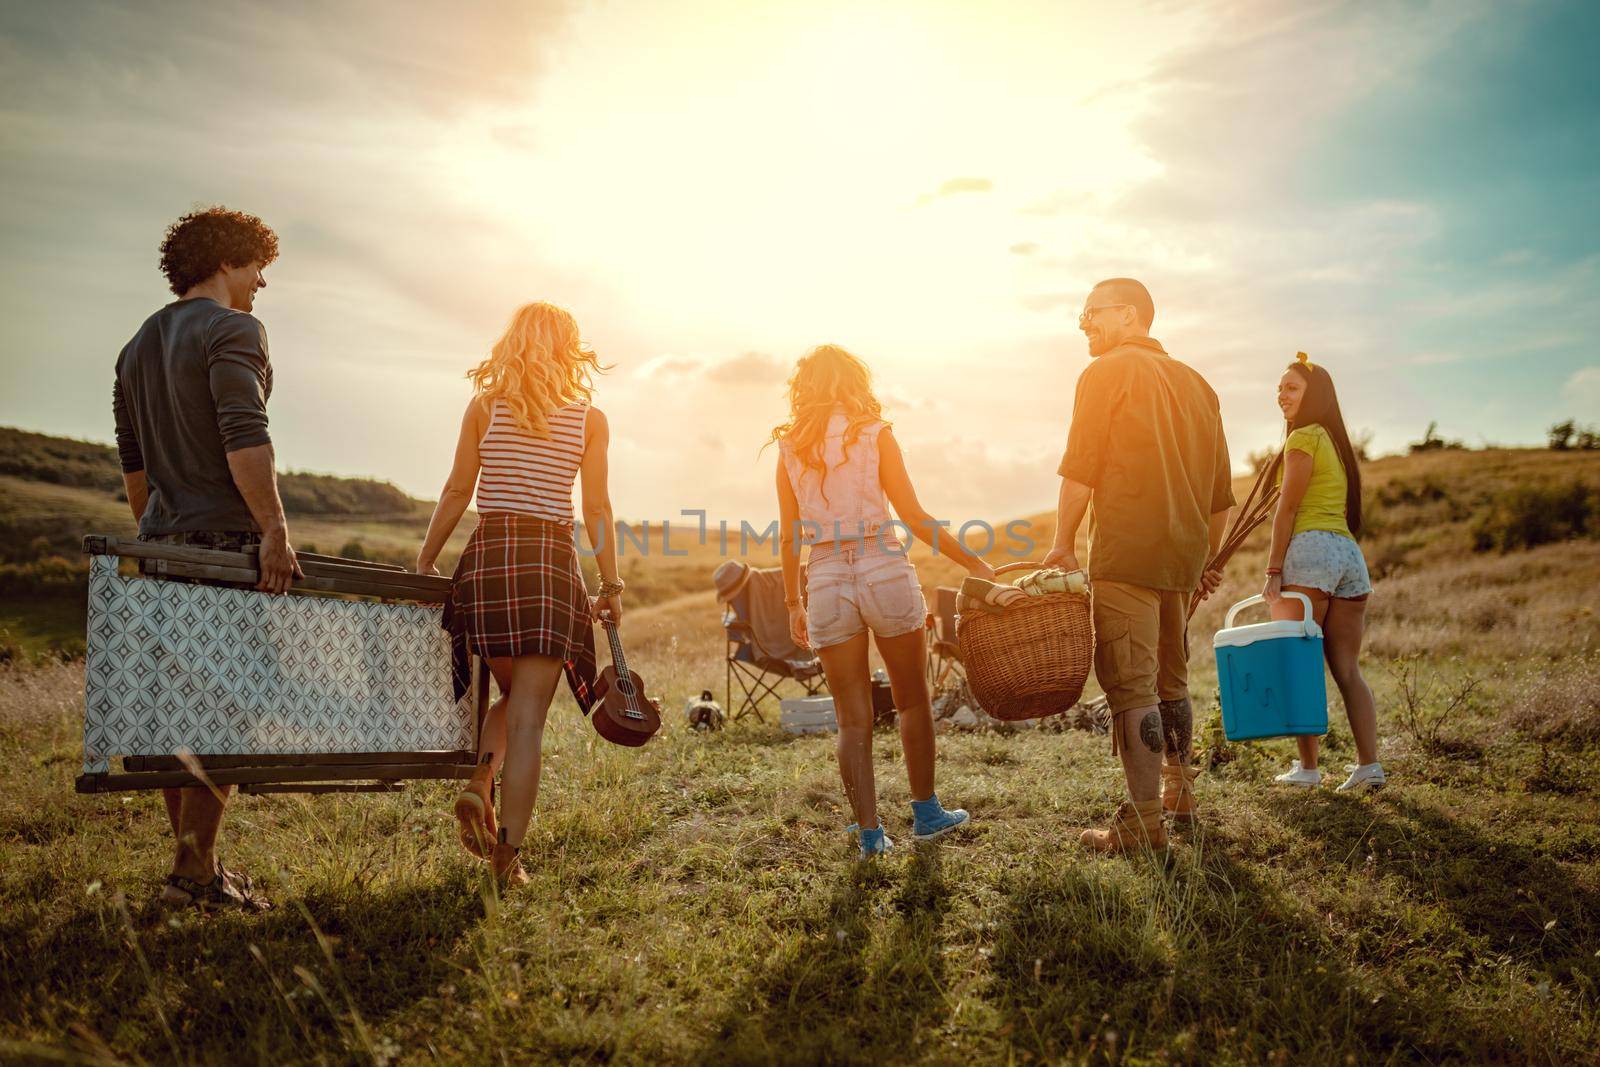 The young friends are preparing for camping. They're holding a resting chair, picnic basket, and other necessaries and searching for a suitable place in a sunset.